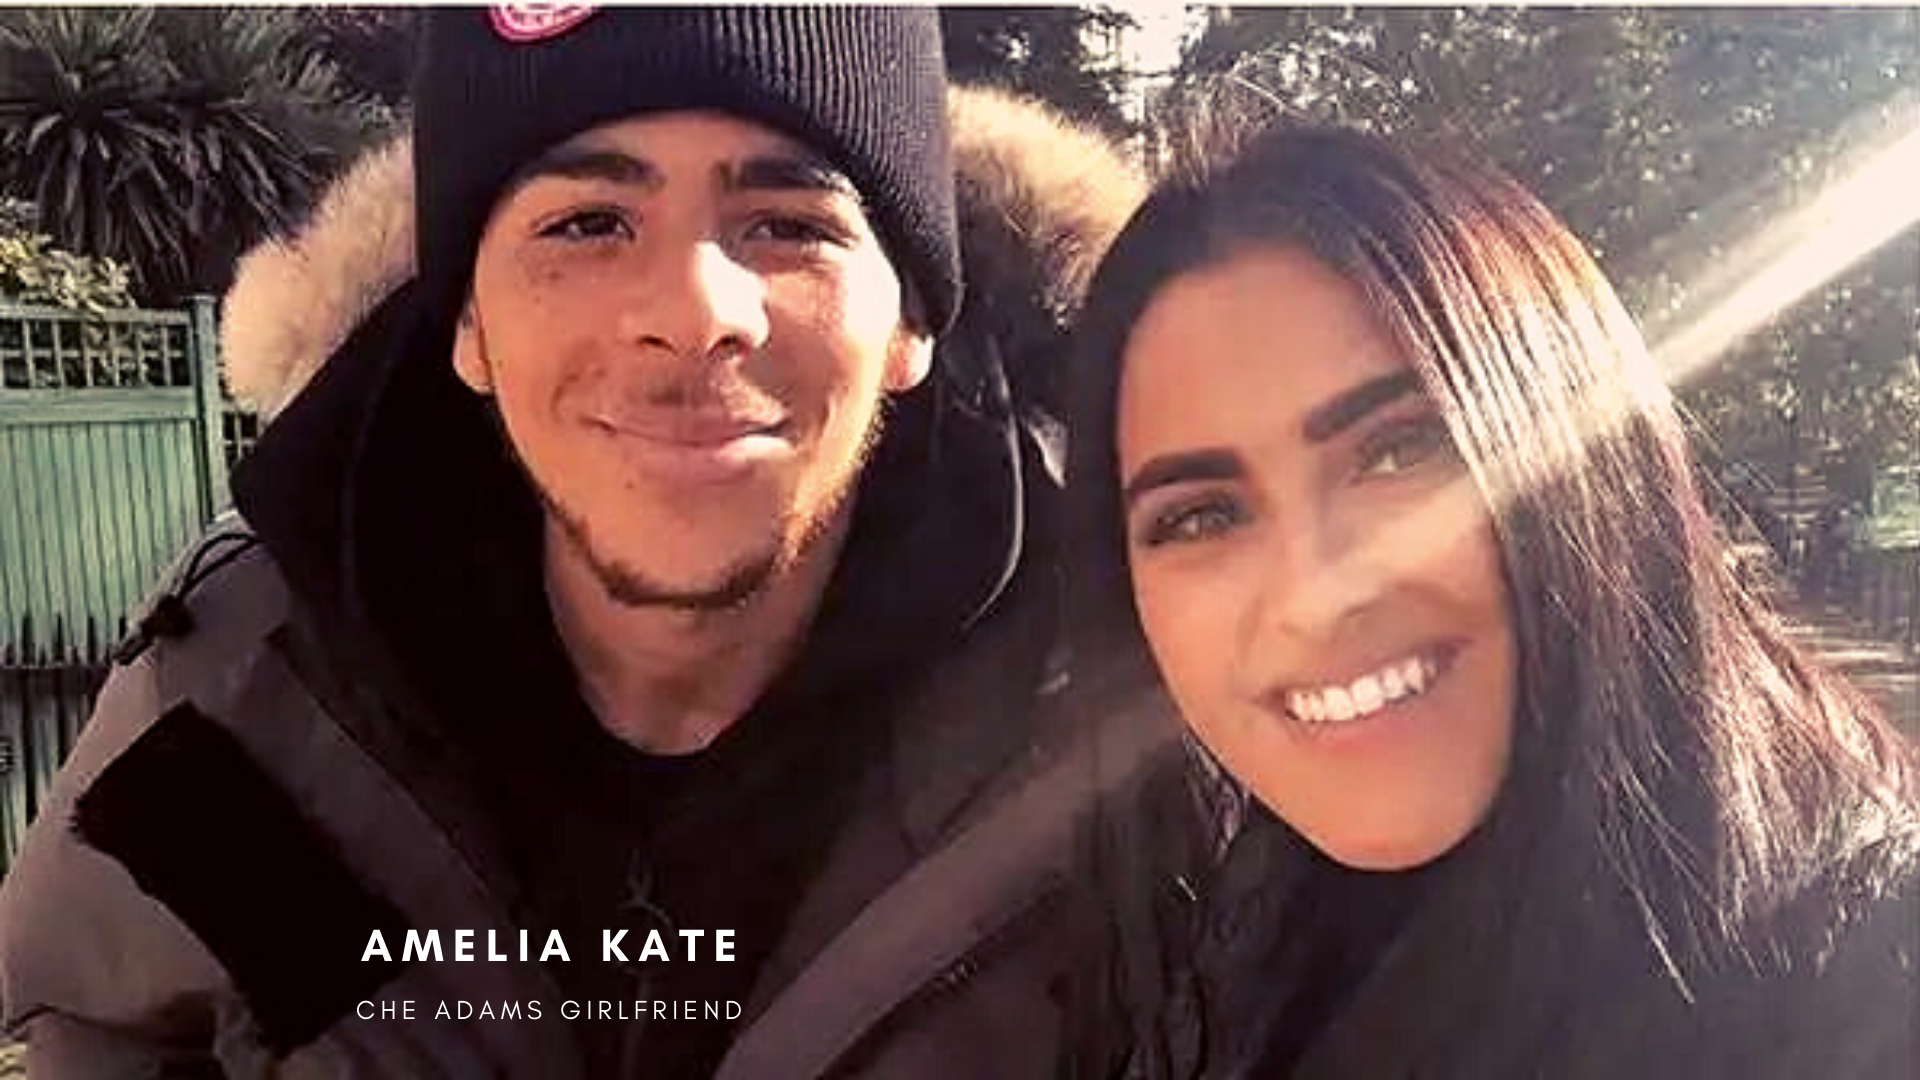 Che Adams with his girlfriend Amelia Kate. (Credit: Oh My Football)